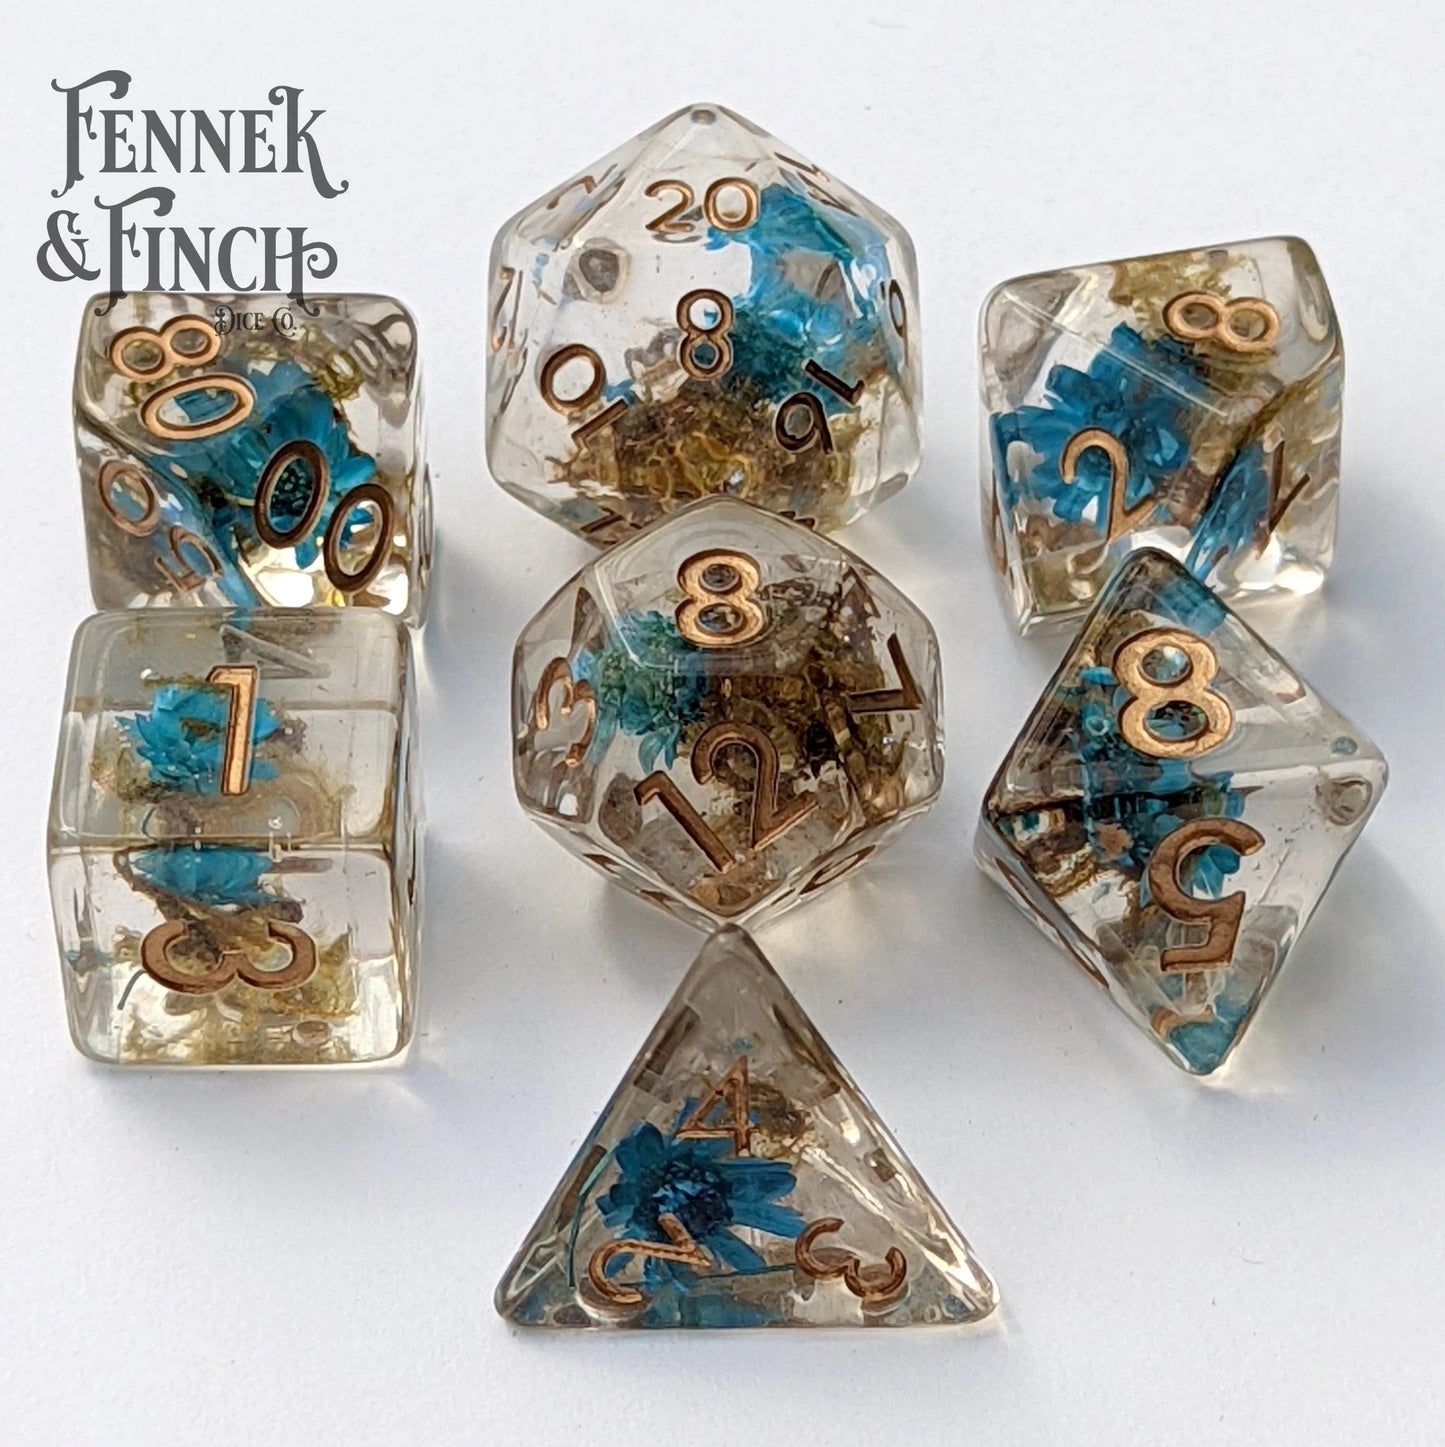 Tiny Blue Flowers and Moss - 7 Piece Dice Set - The Fourth Place